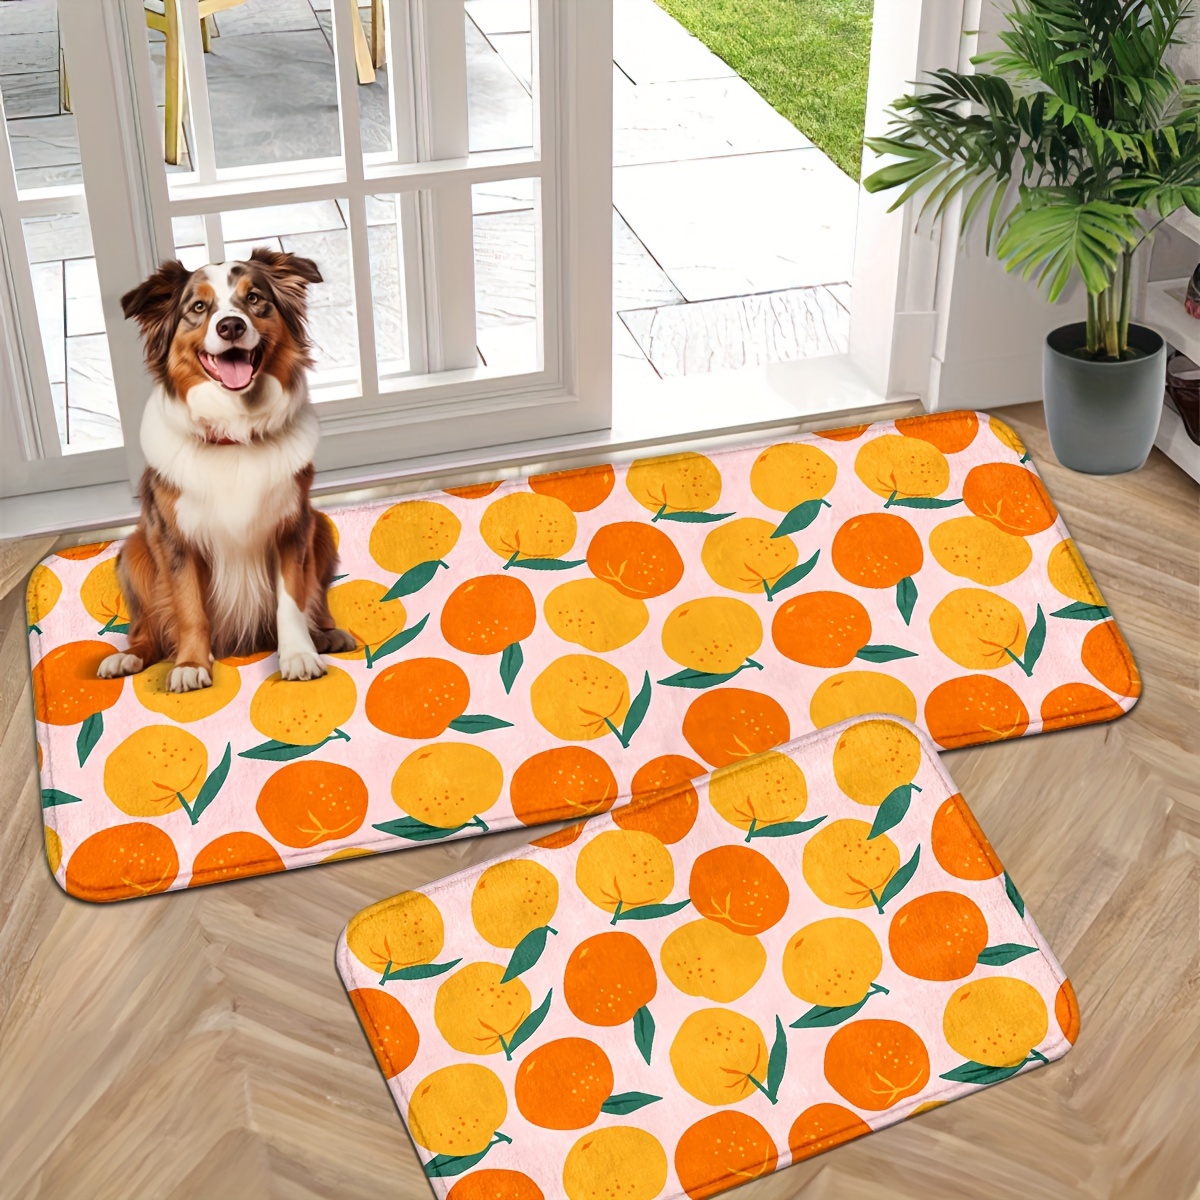 

Polyester Fruit Pattern Kitchen Rugs Set - Machine Washable, Knit Weave, Non-slip, Absorbent Runner Mats For Home, Office, Sink, Laundry Room - Spring Decor, Multiple Sizes Available